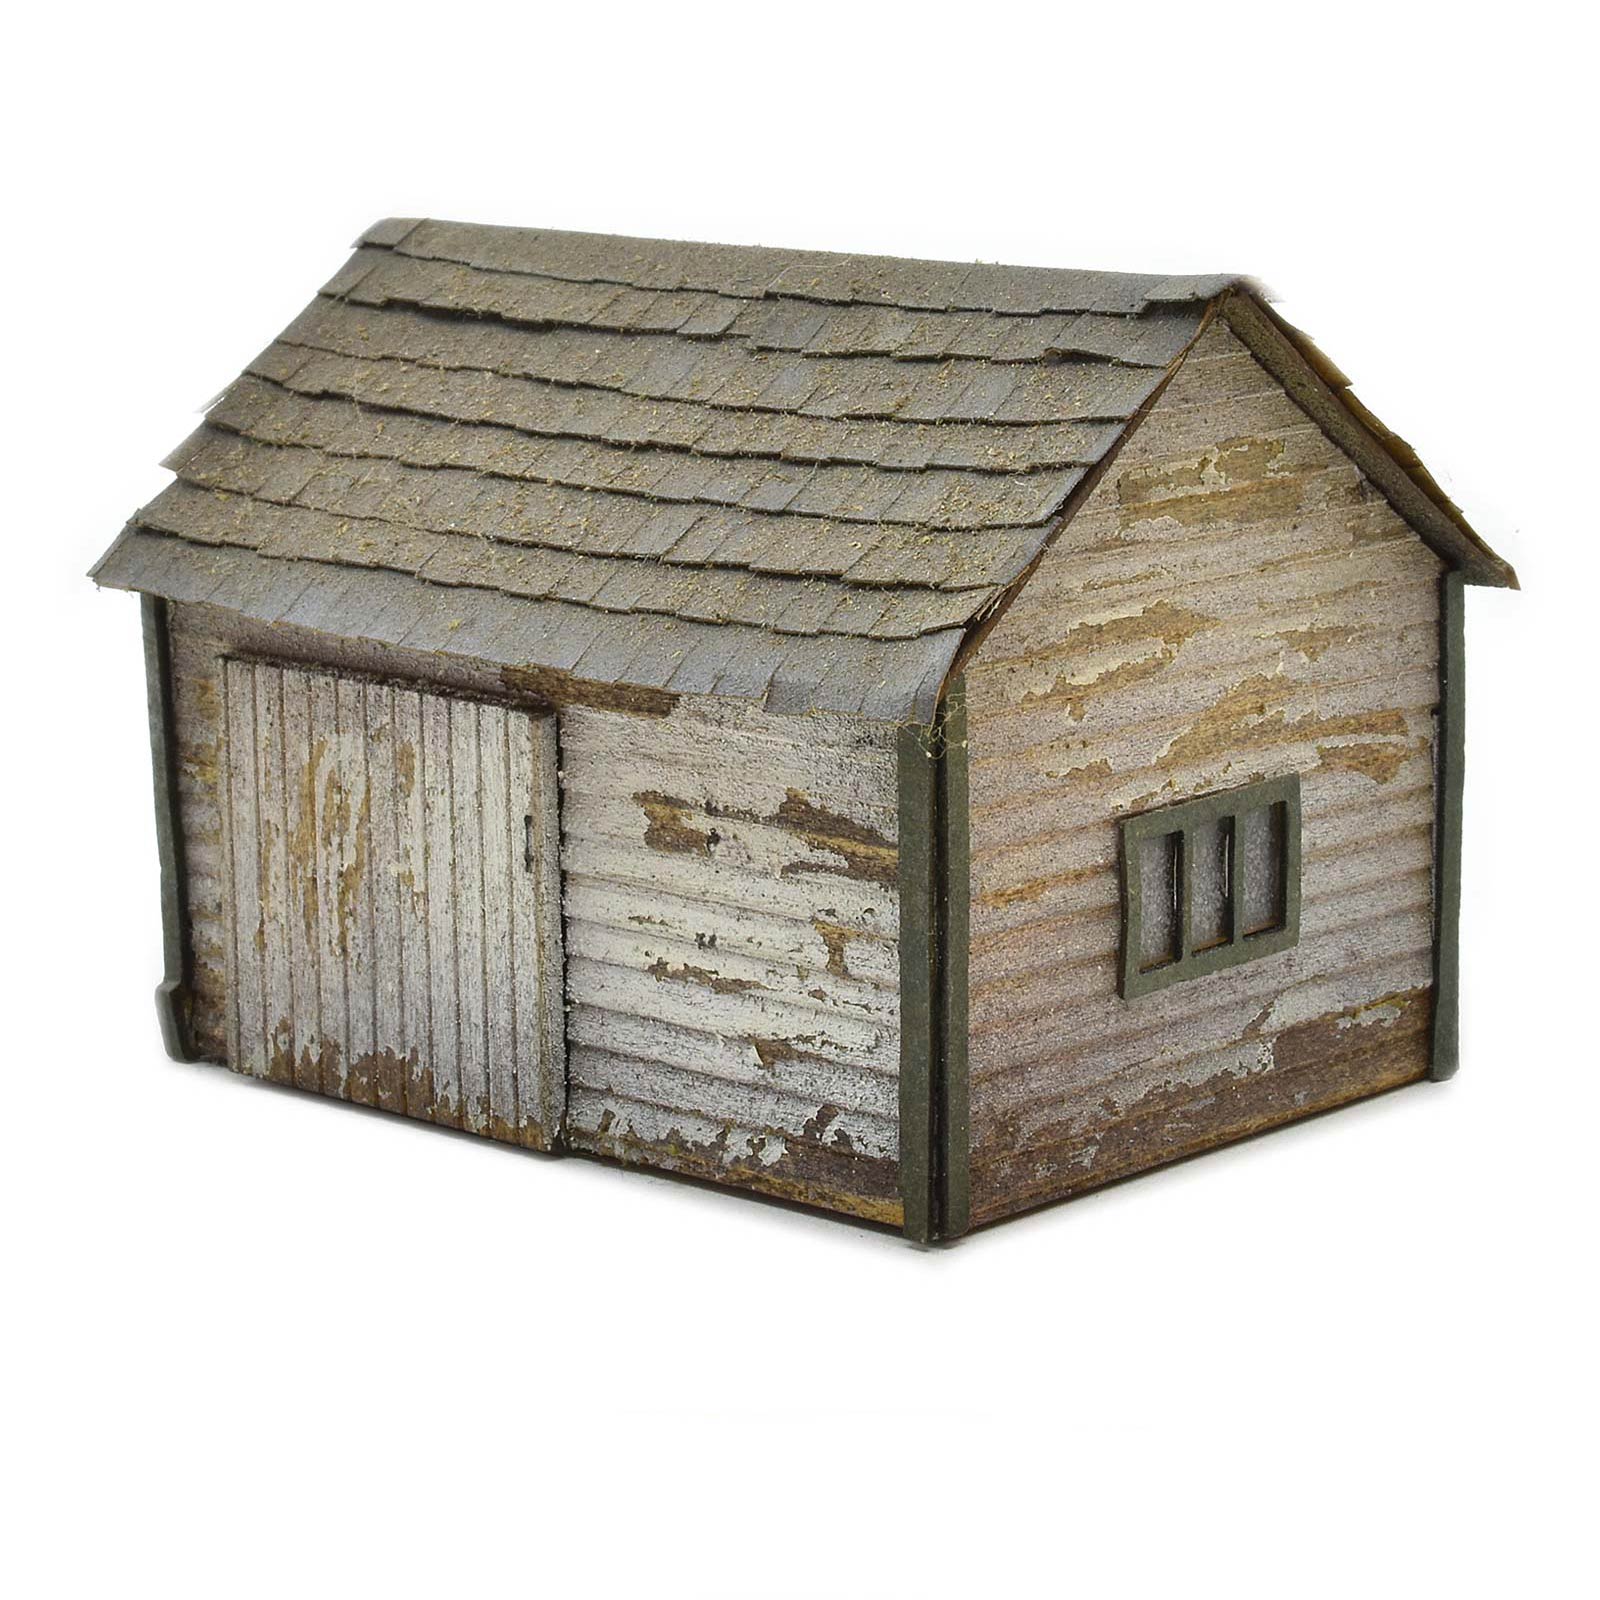 Rural Workshop Tool Shed Kit, HO Scale, By Scientific - Micro - Mark Laser Model Kits